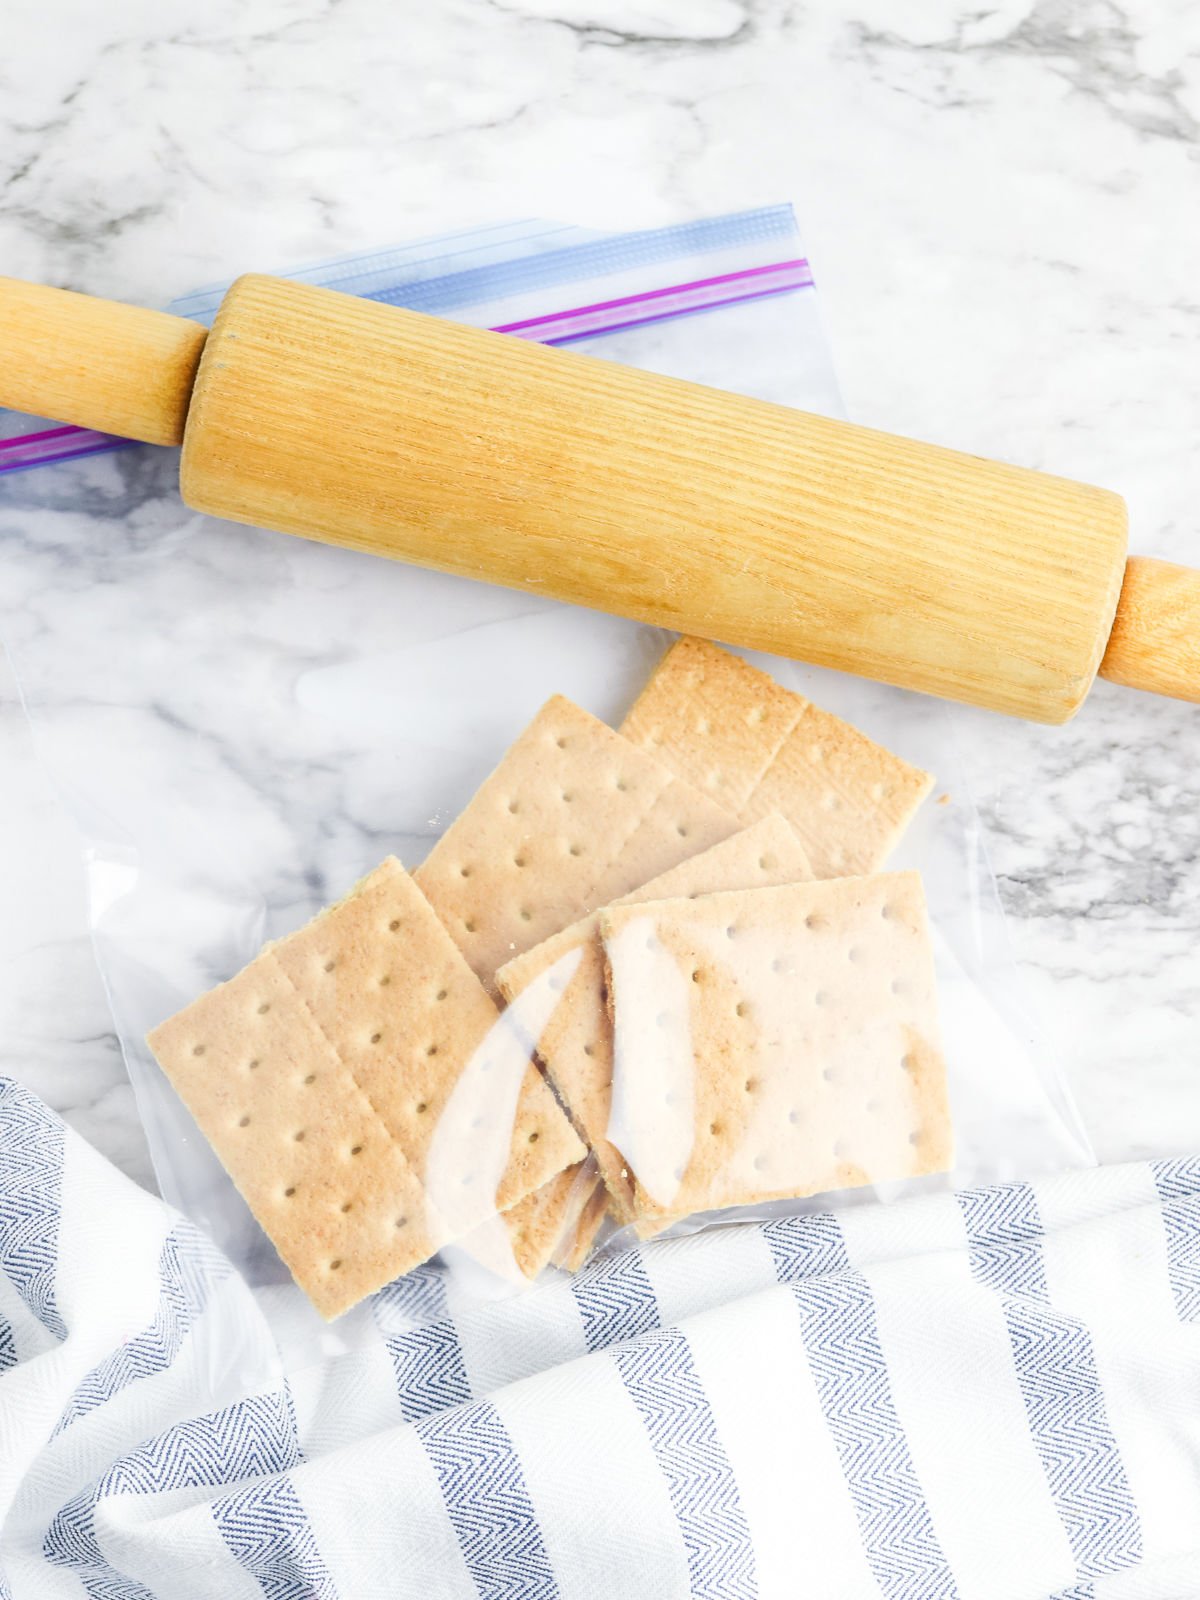 Graham crackers in a bag with a rolling pin.